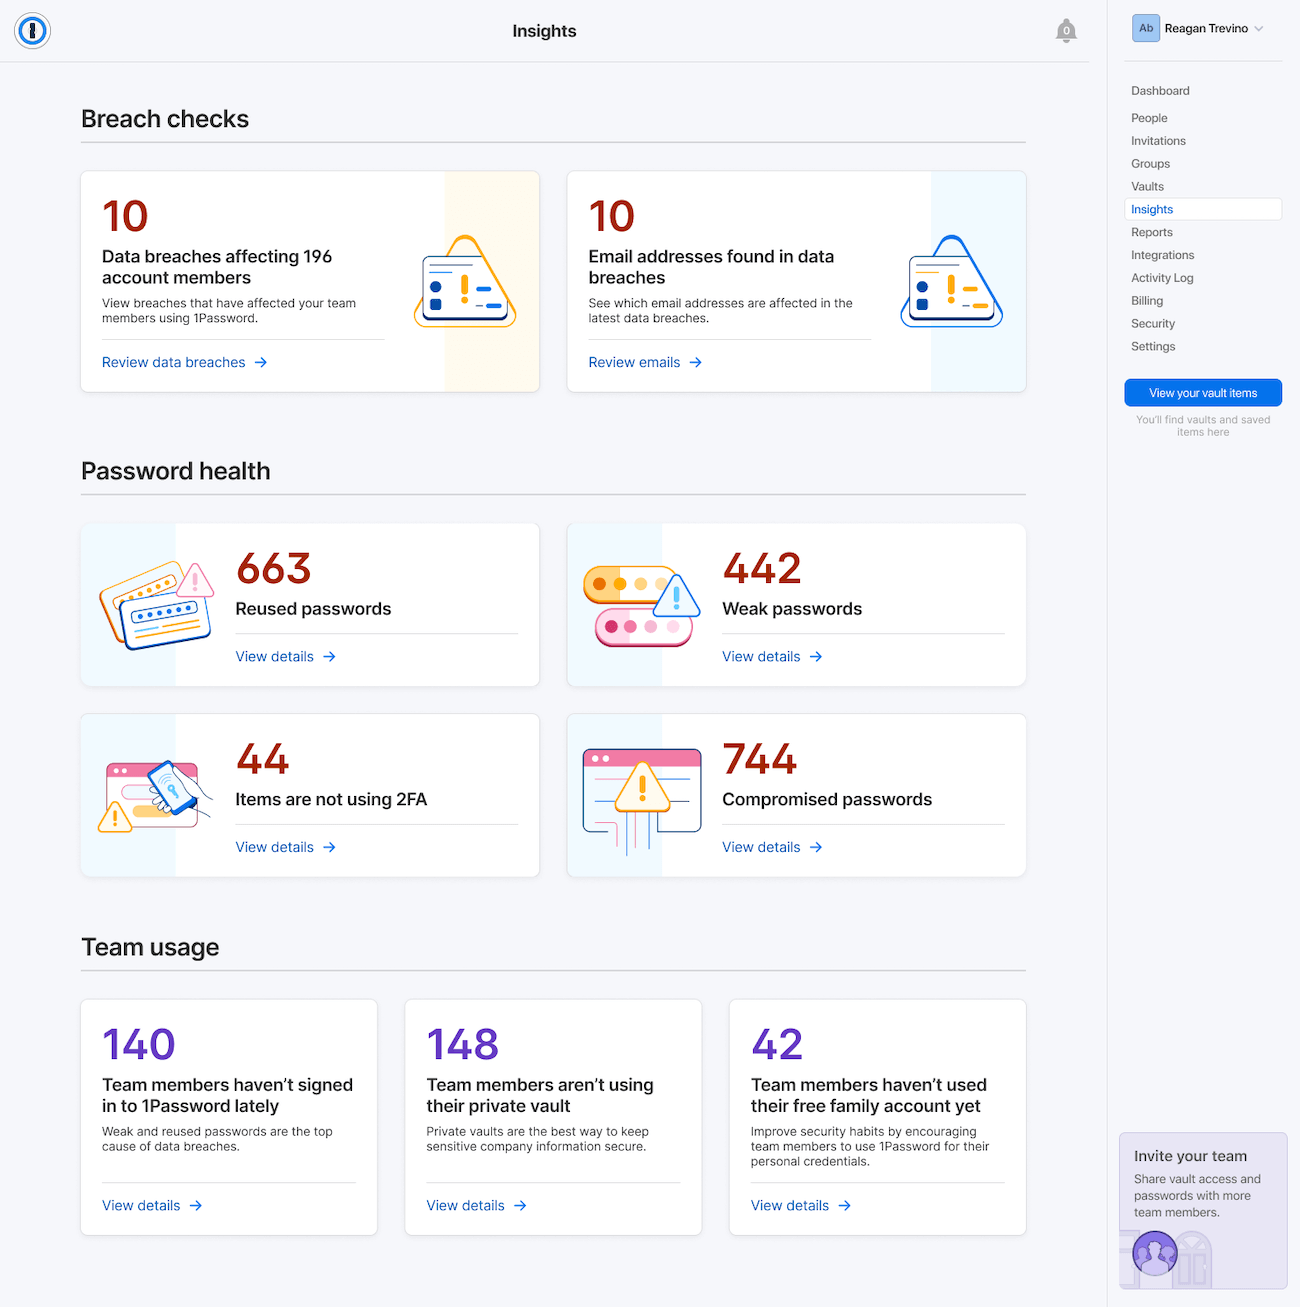 The 1Password Insights dashboard showing statistics like breach checks, password health, and team usage.